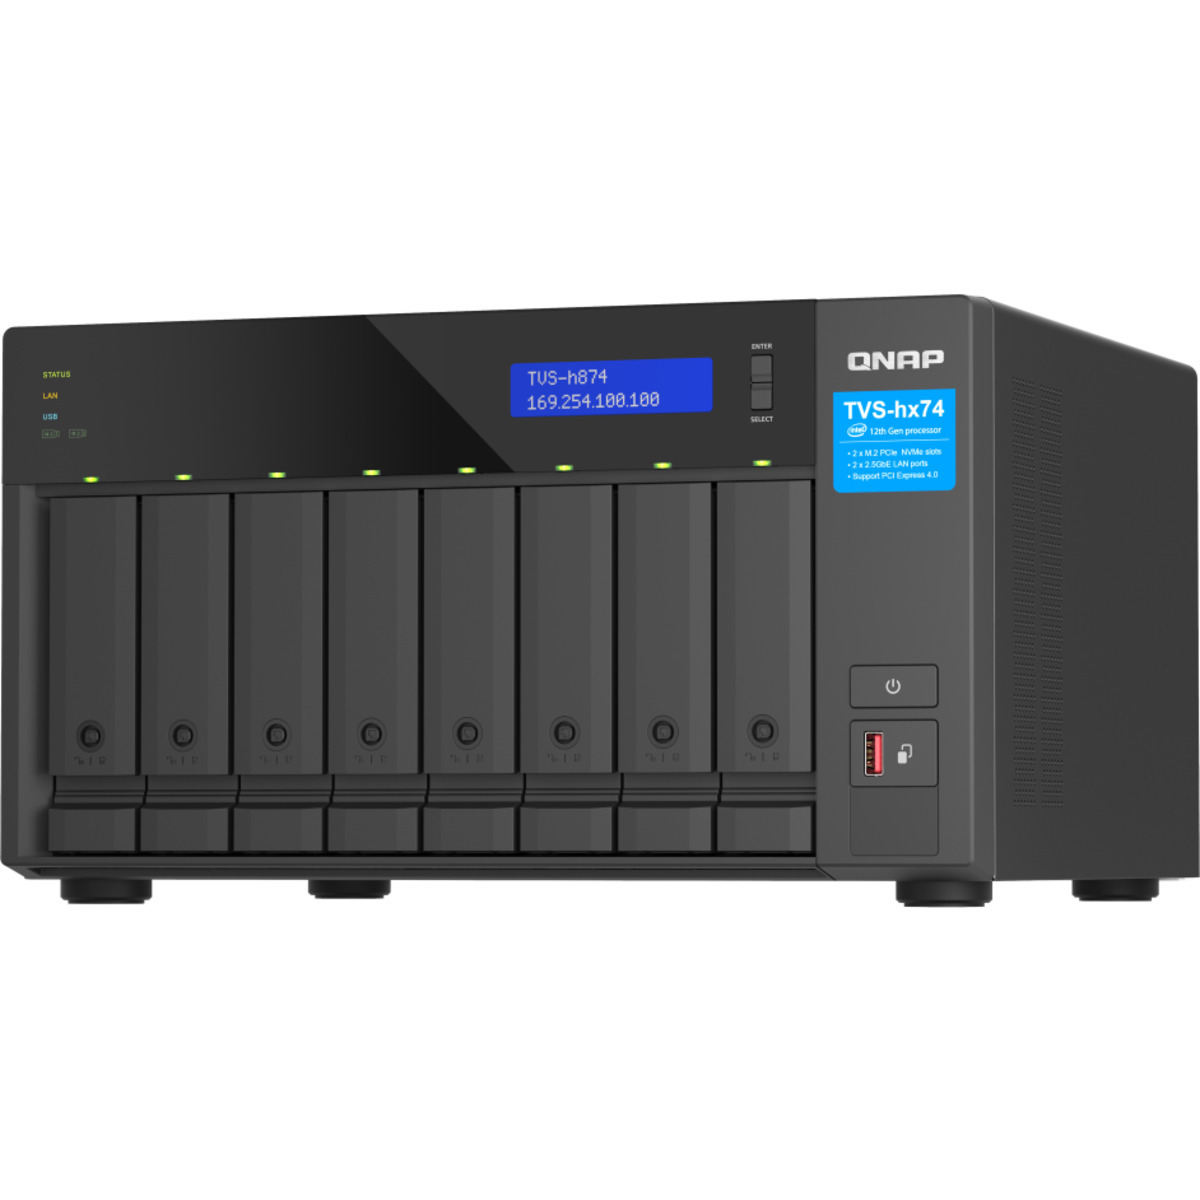 QNAP TVS-h874 Core i5 10tb 8-Bay Desktop Multimedia / Power User / Business NAS - Network Attached Storage Device 5x2tb Western Digital Red Pro WD2002FFSX 3.5 7200rpm SATA 6Gb/s HDD NAS Class Drives Installed - Burn-In Tested TVS-h874 Core i5